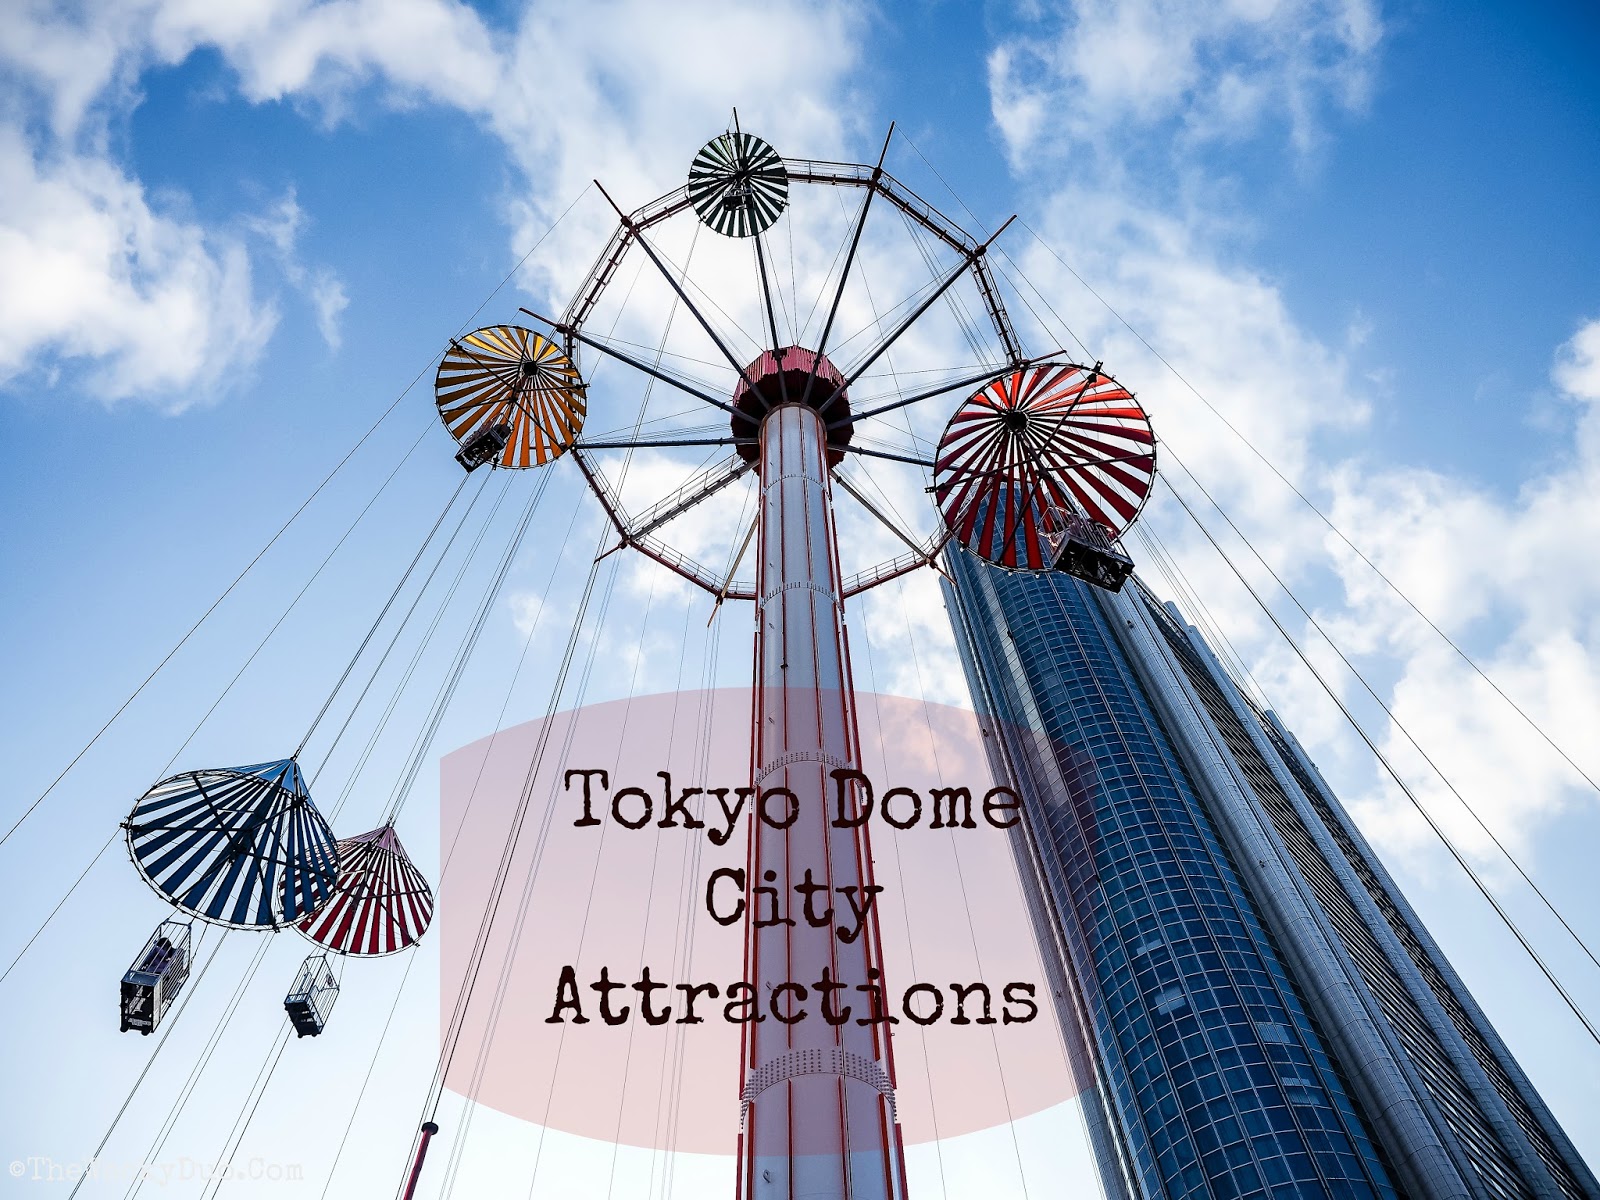 Tokyo Travel Blog : Tokyo Dome City Attractions Review.